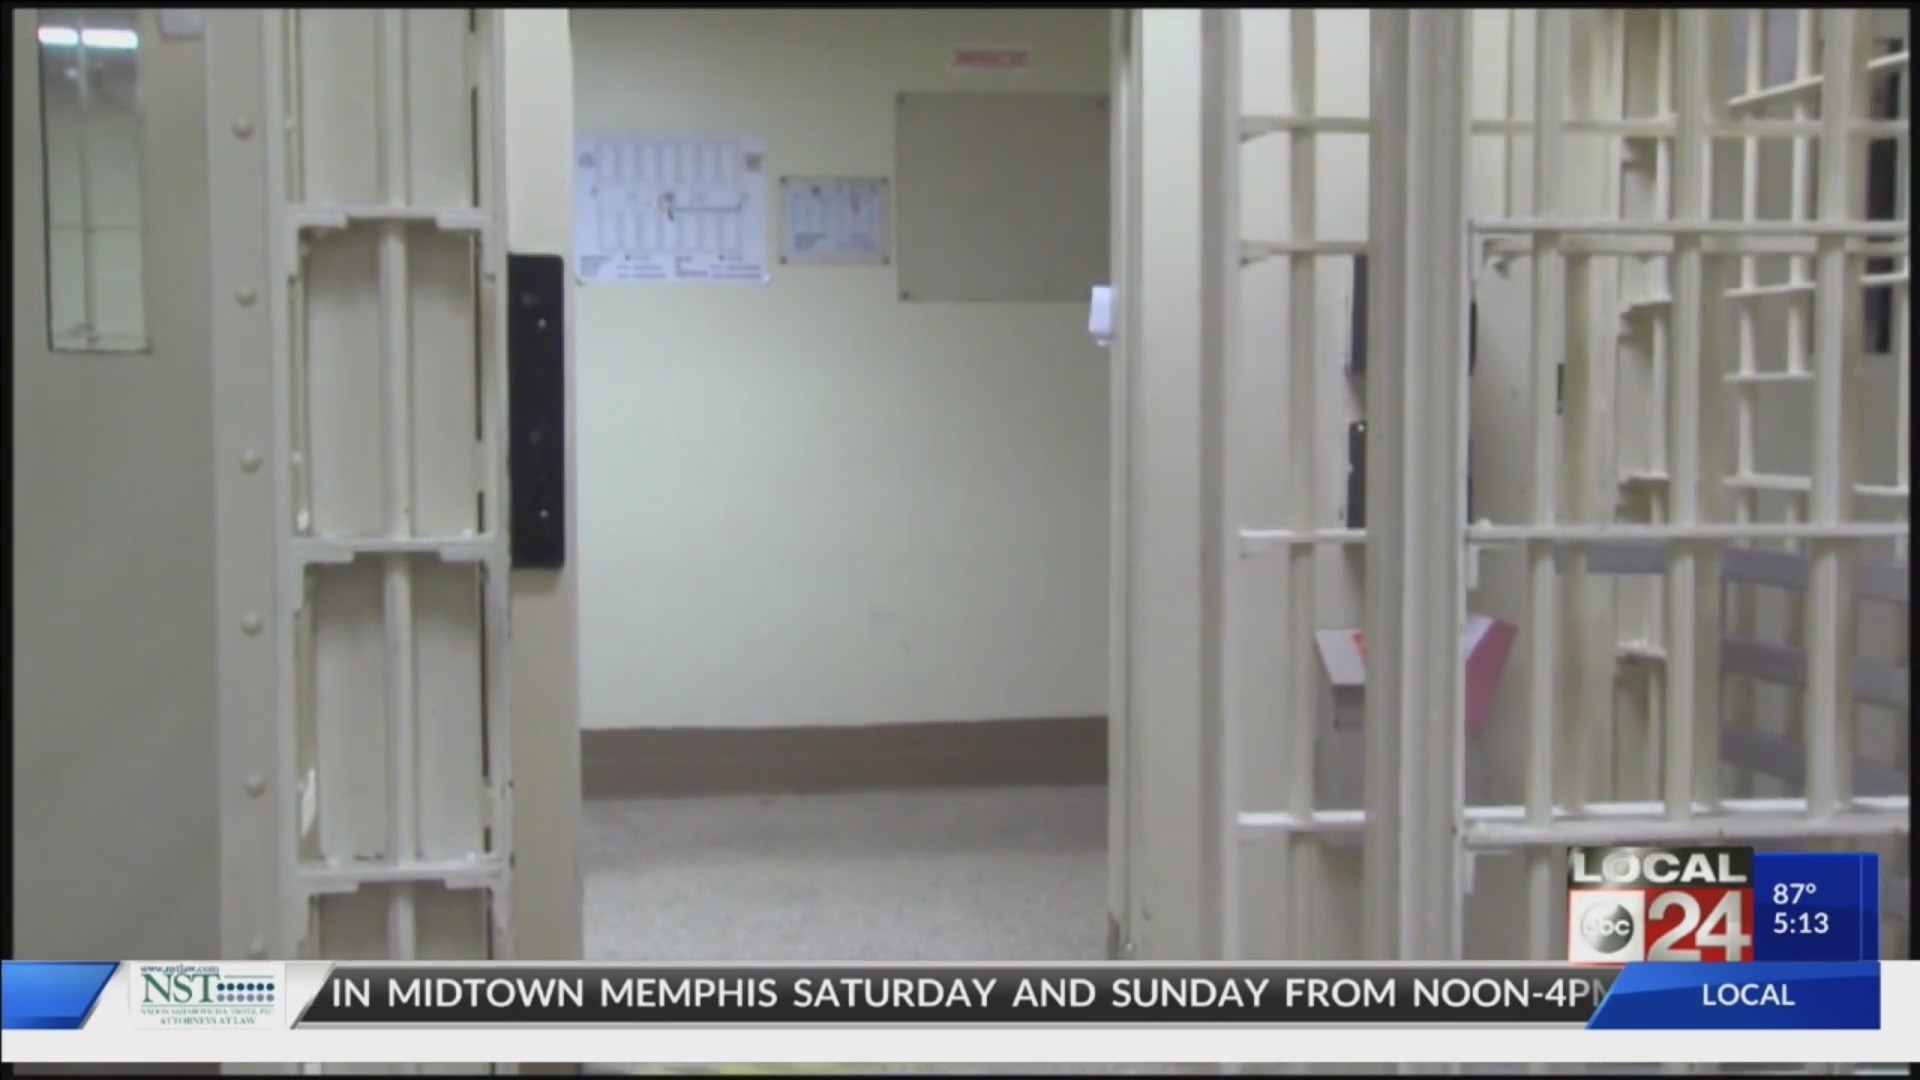 Expungement: A first-of-its-kind move by City Council and Shelby Criminal Court Clerk